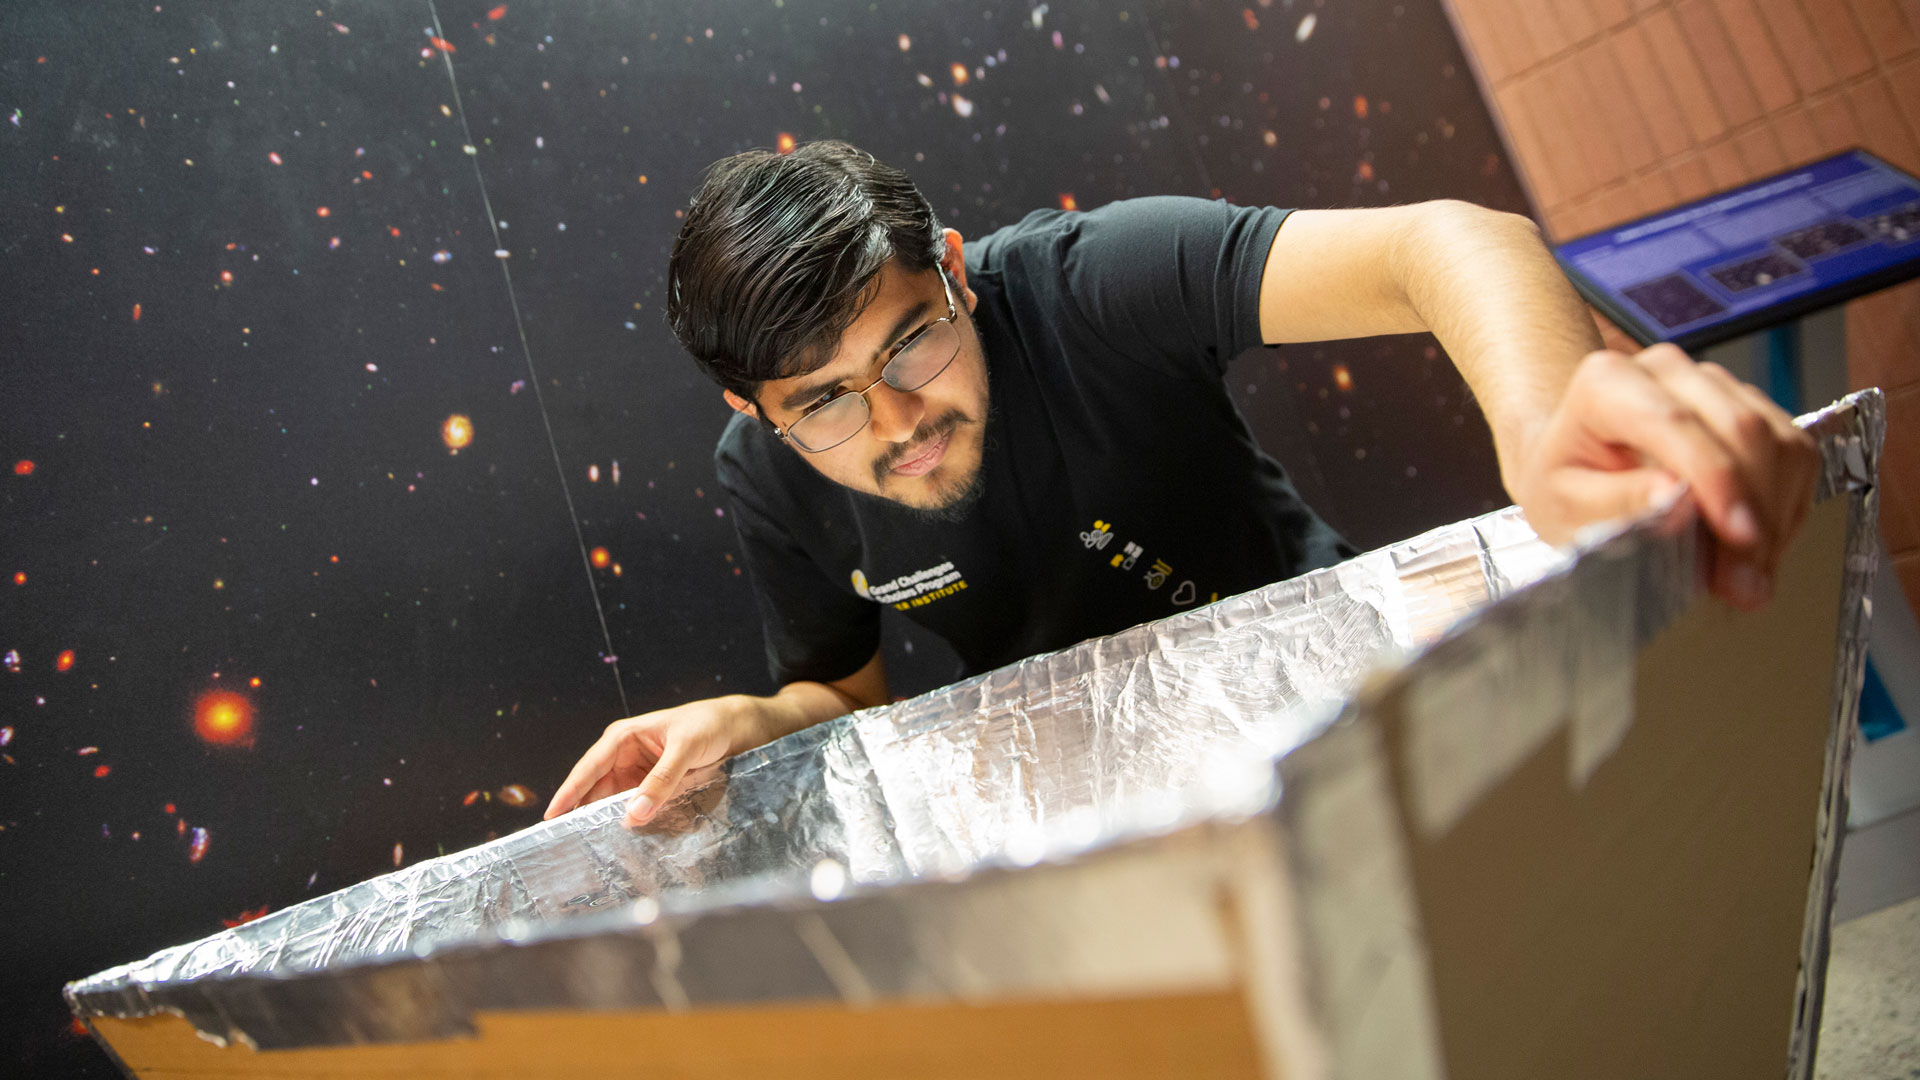 Ritwik Sharma works with a foil covered structure used to help teach astronomy to K-12 students as part of a Grand Challenges Scholars Program research stipend project.